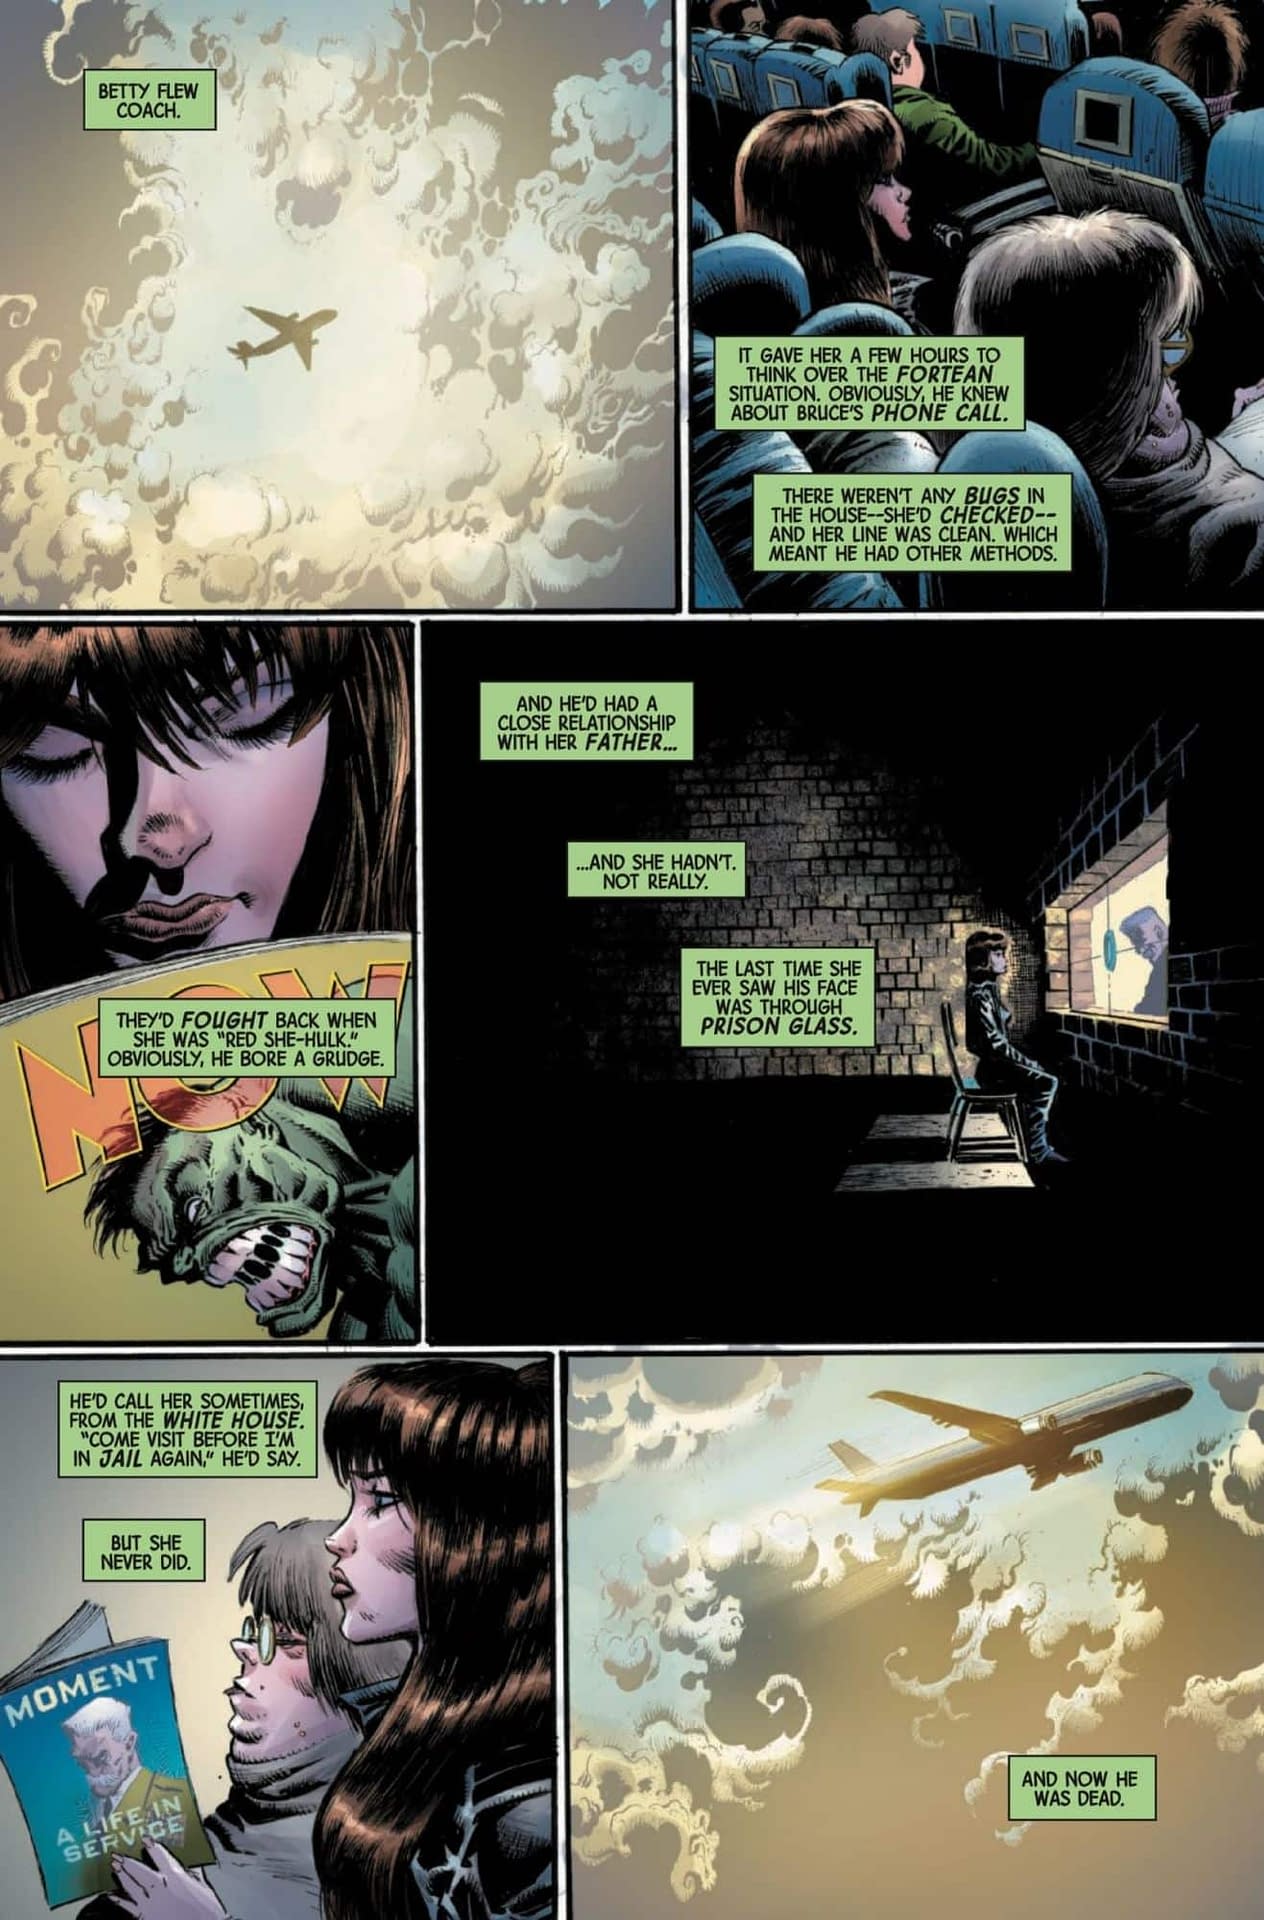 The Fleeting Nature of Death in the Marvel Universe for Next Week's Immortal Hulk #14